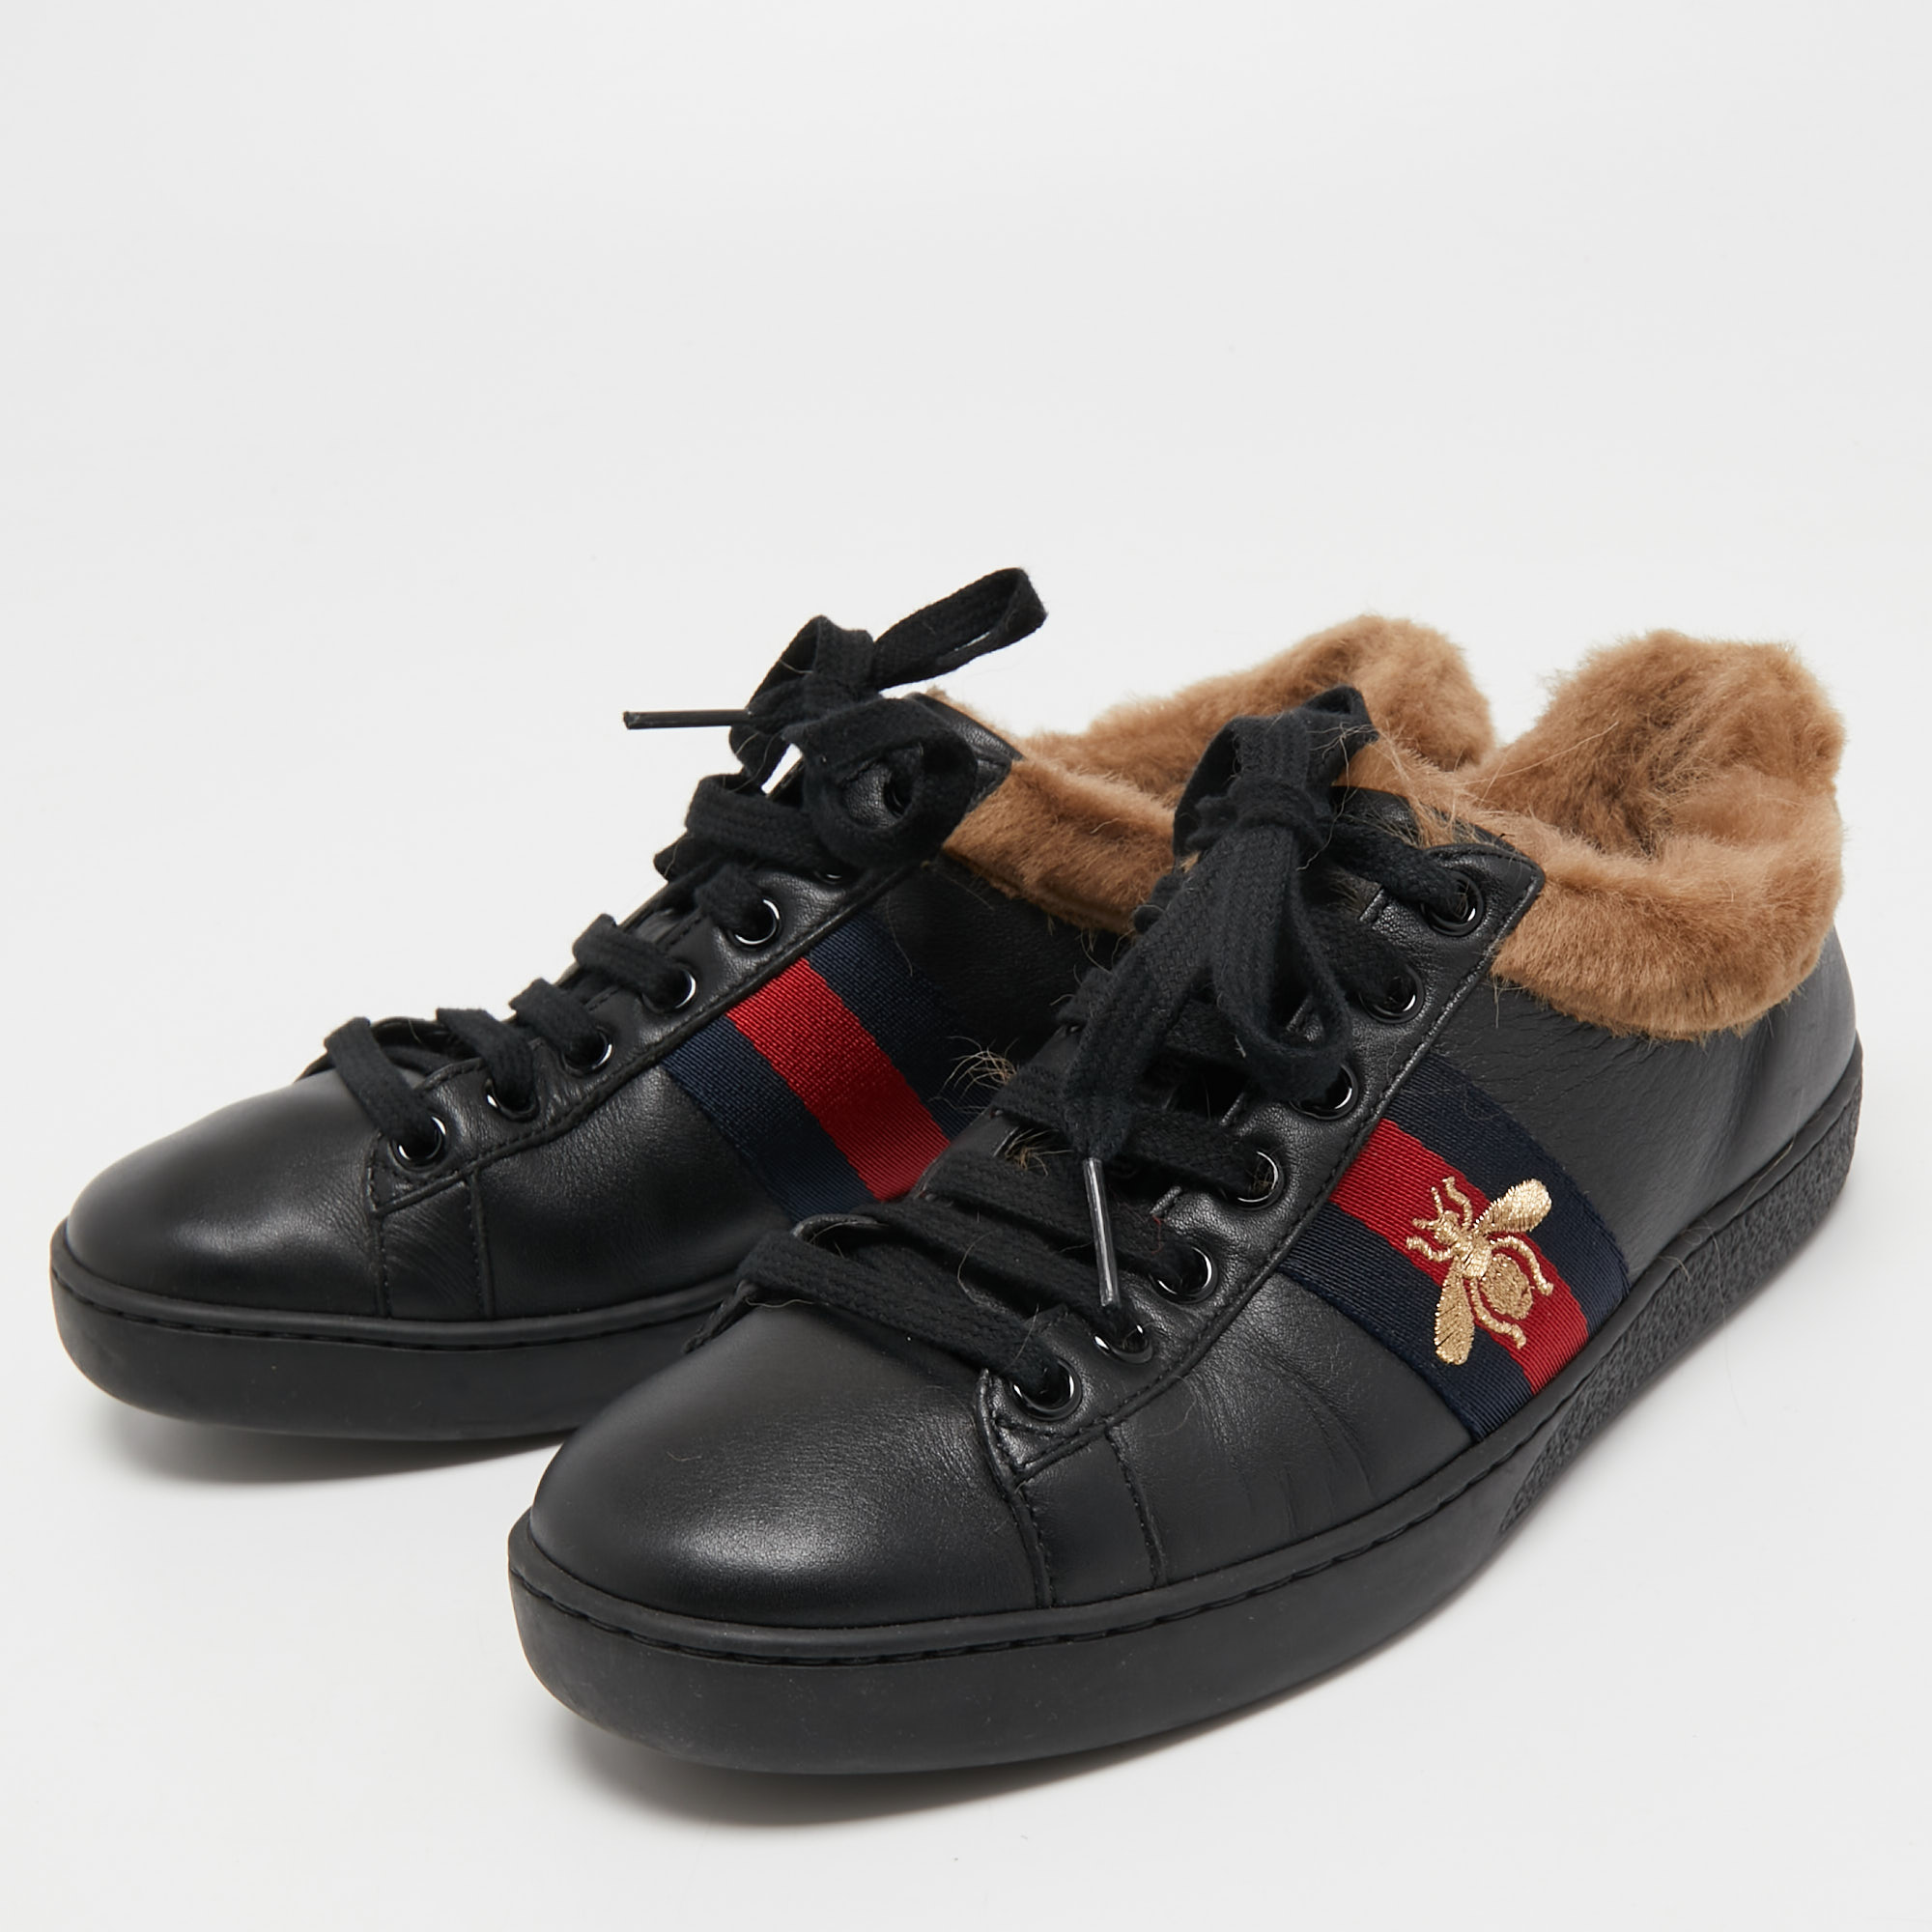 

Gucci Black Leather and Fur Ace Embroidered Bee Low Top Sneakers Size